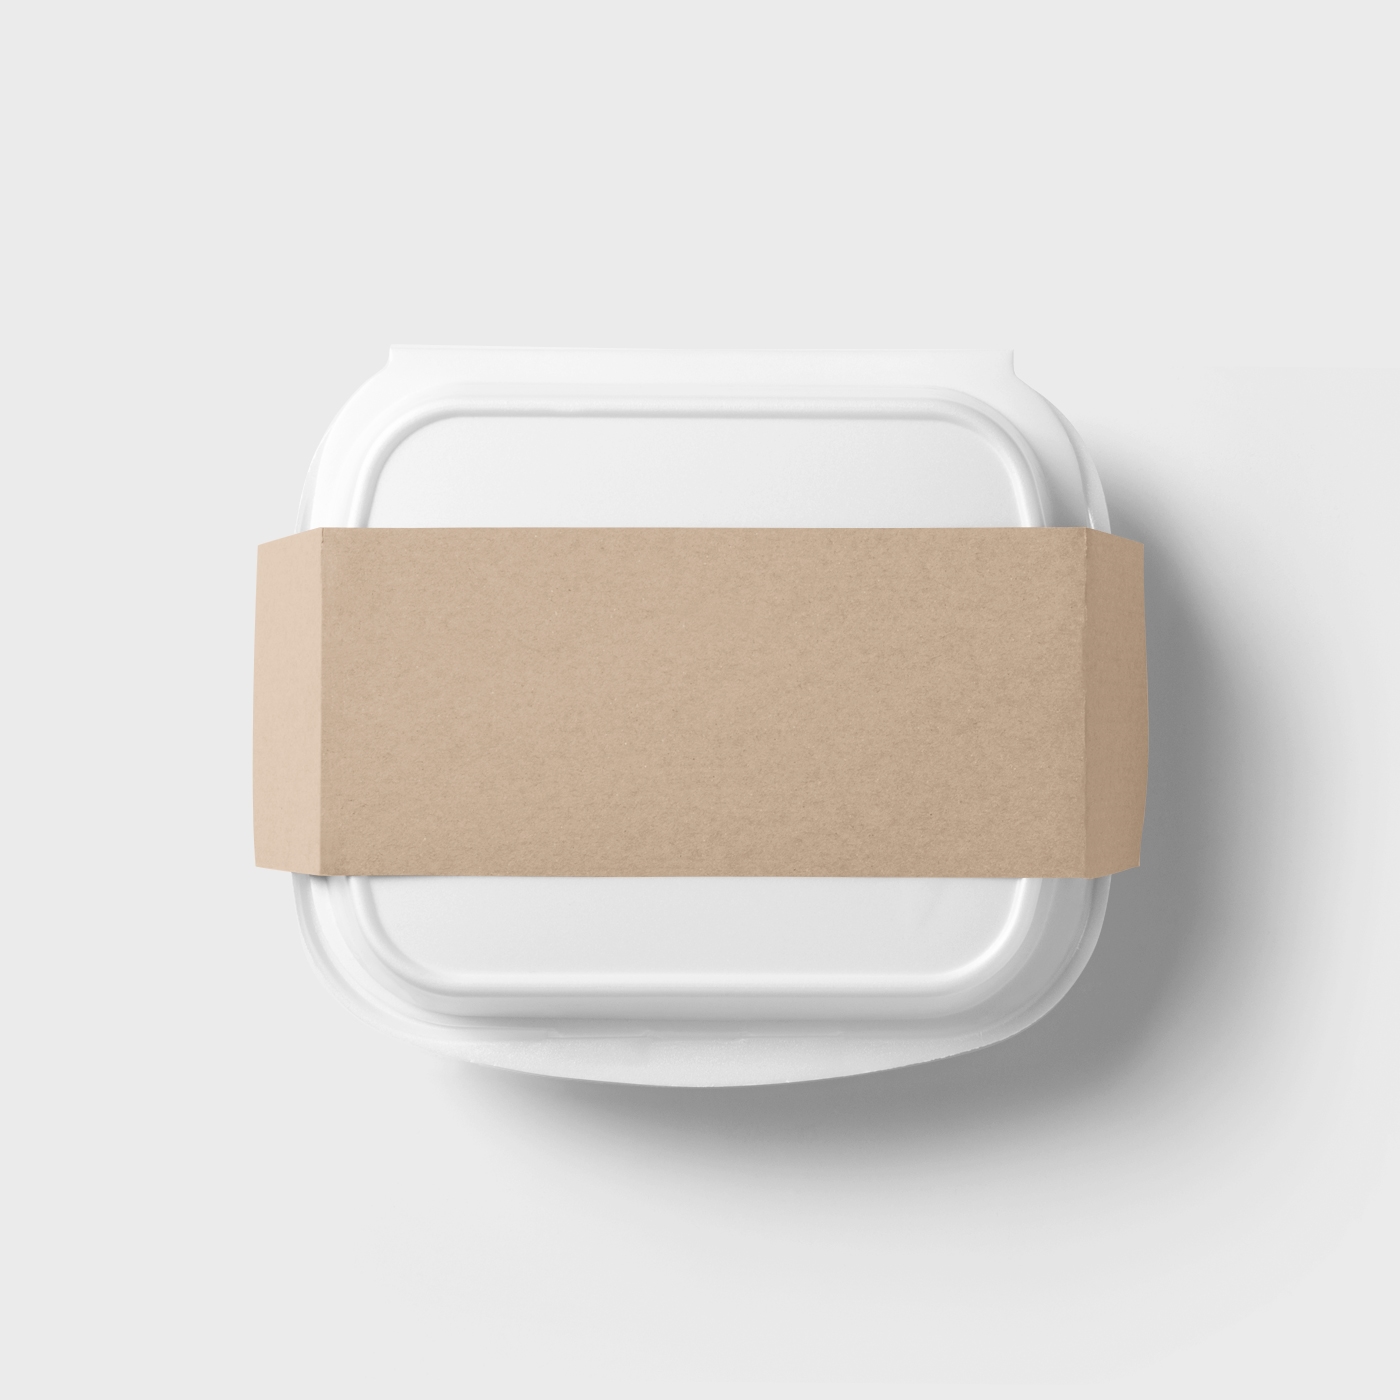 Top View of a Labeled Container Box Mockup FREE PSD